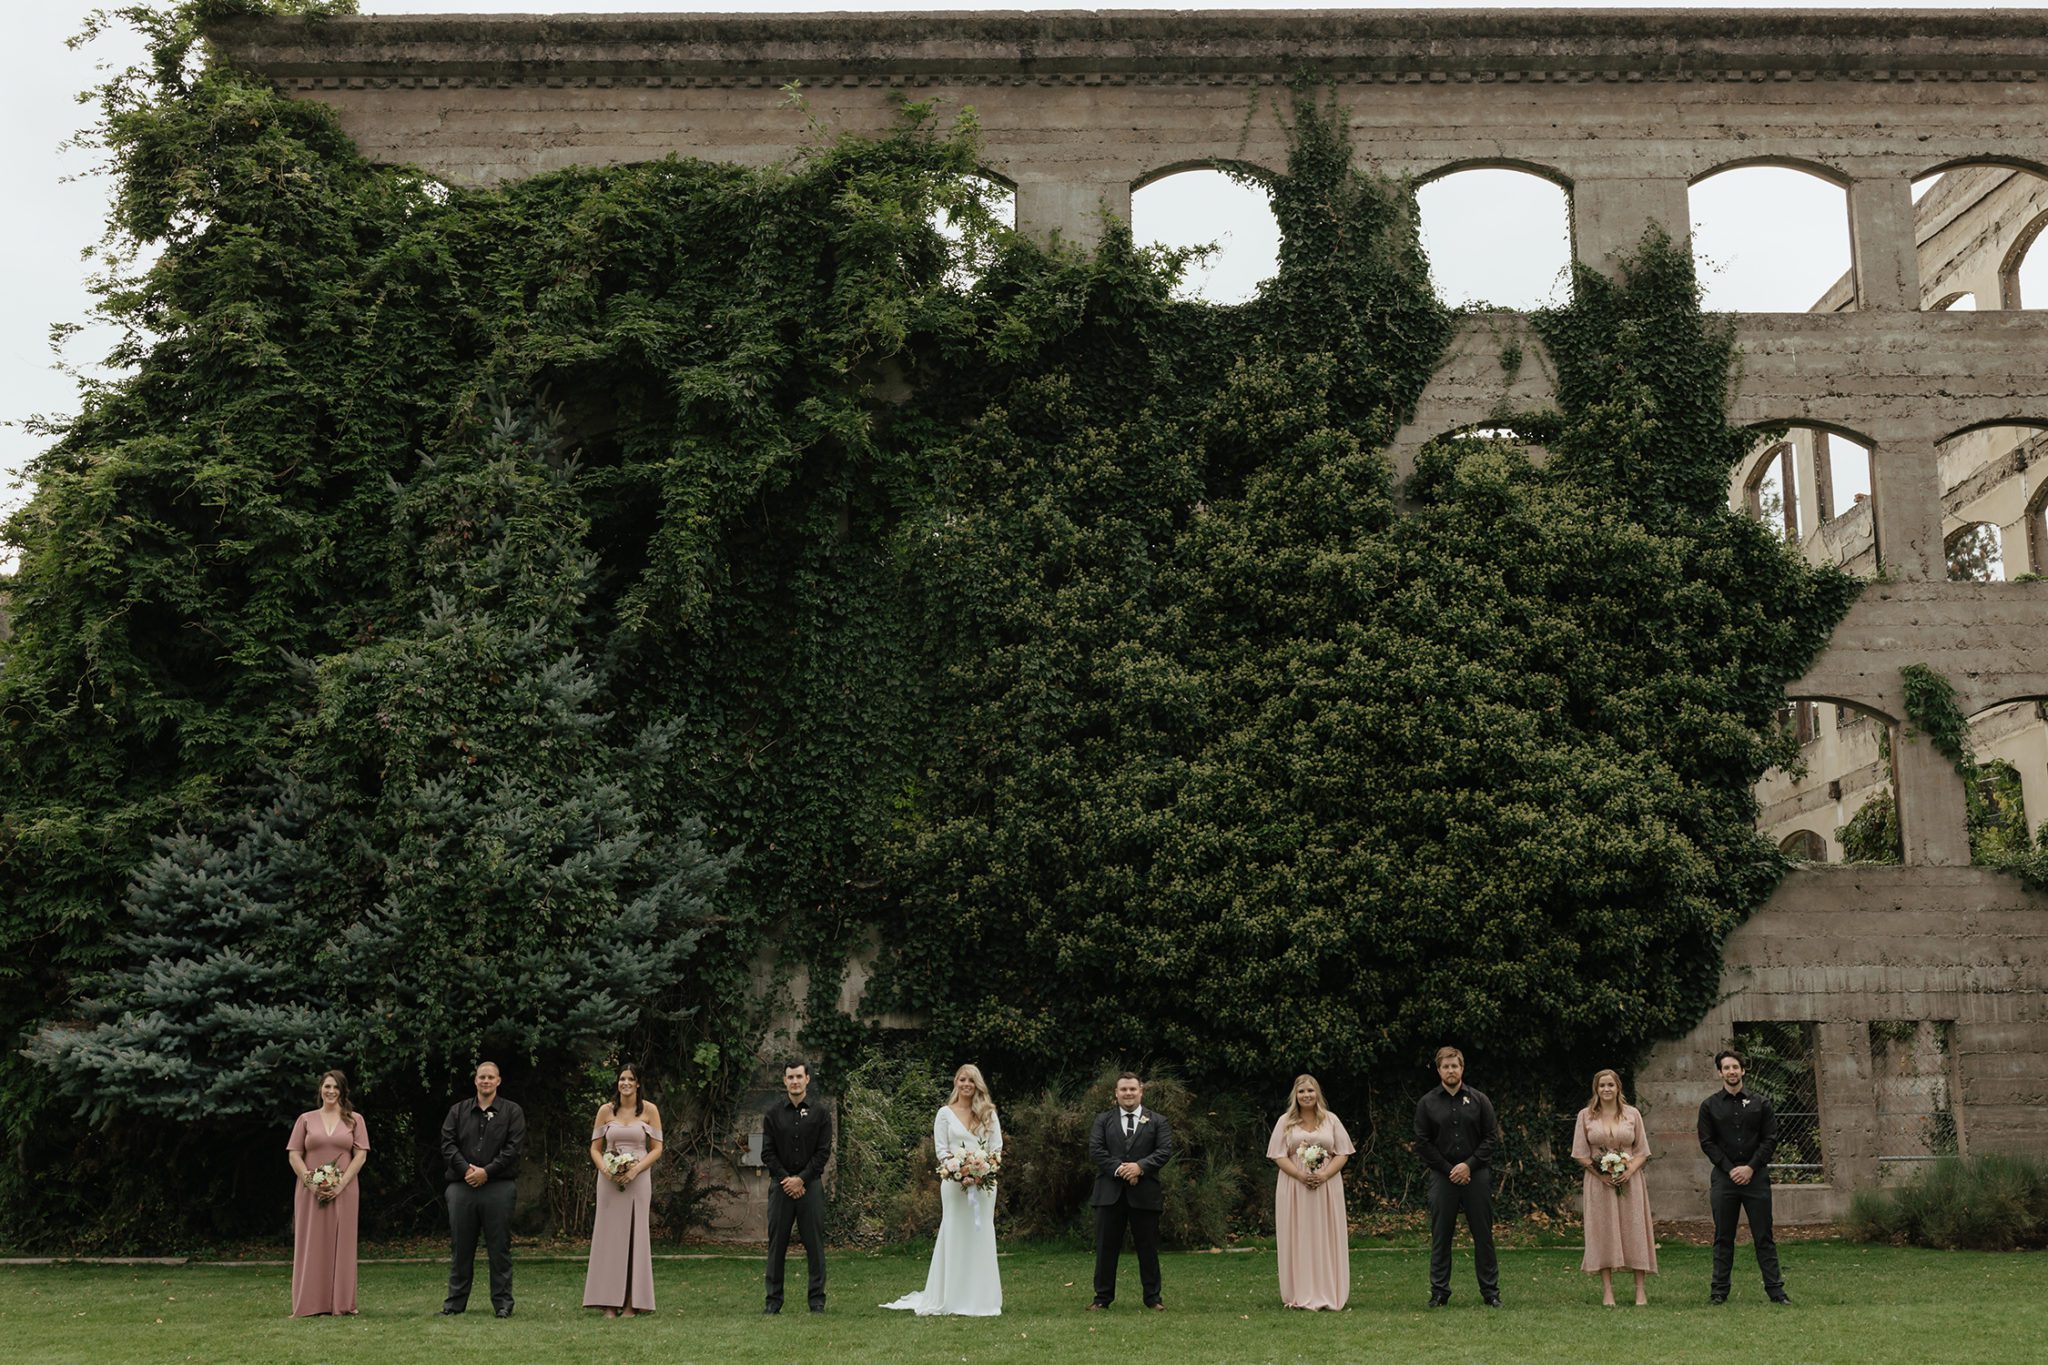 Wedding party inspiration in blush and black hues for this Okanagan Valley summer wedding in British Columbia